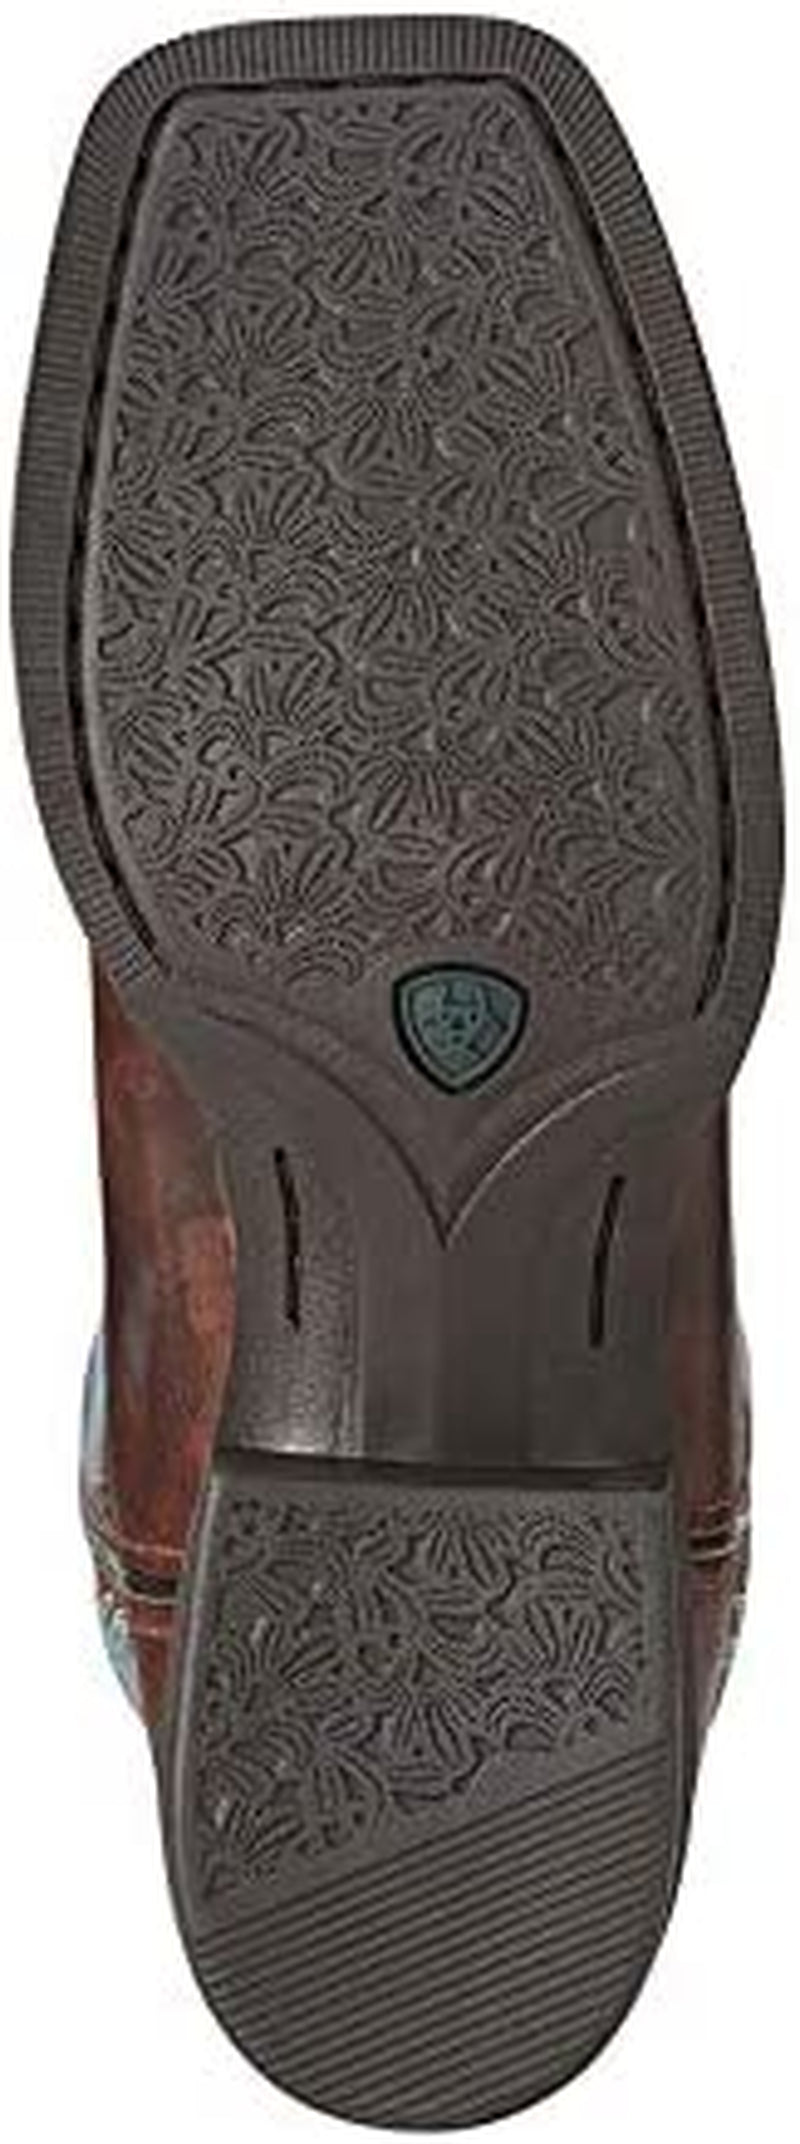 Women'S round up Square Toe Western Cowboy Boot